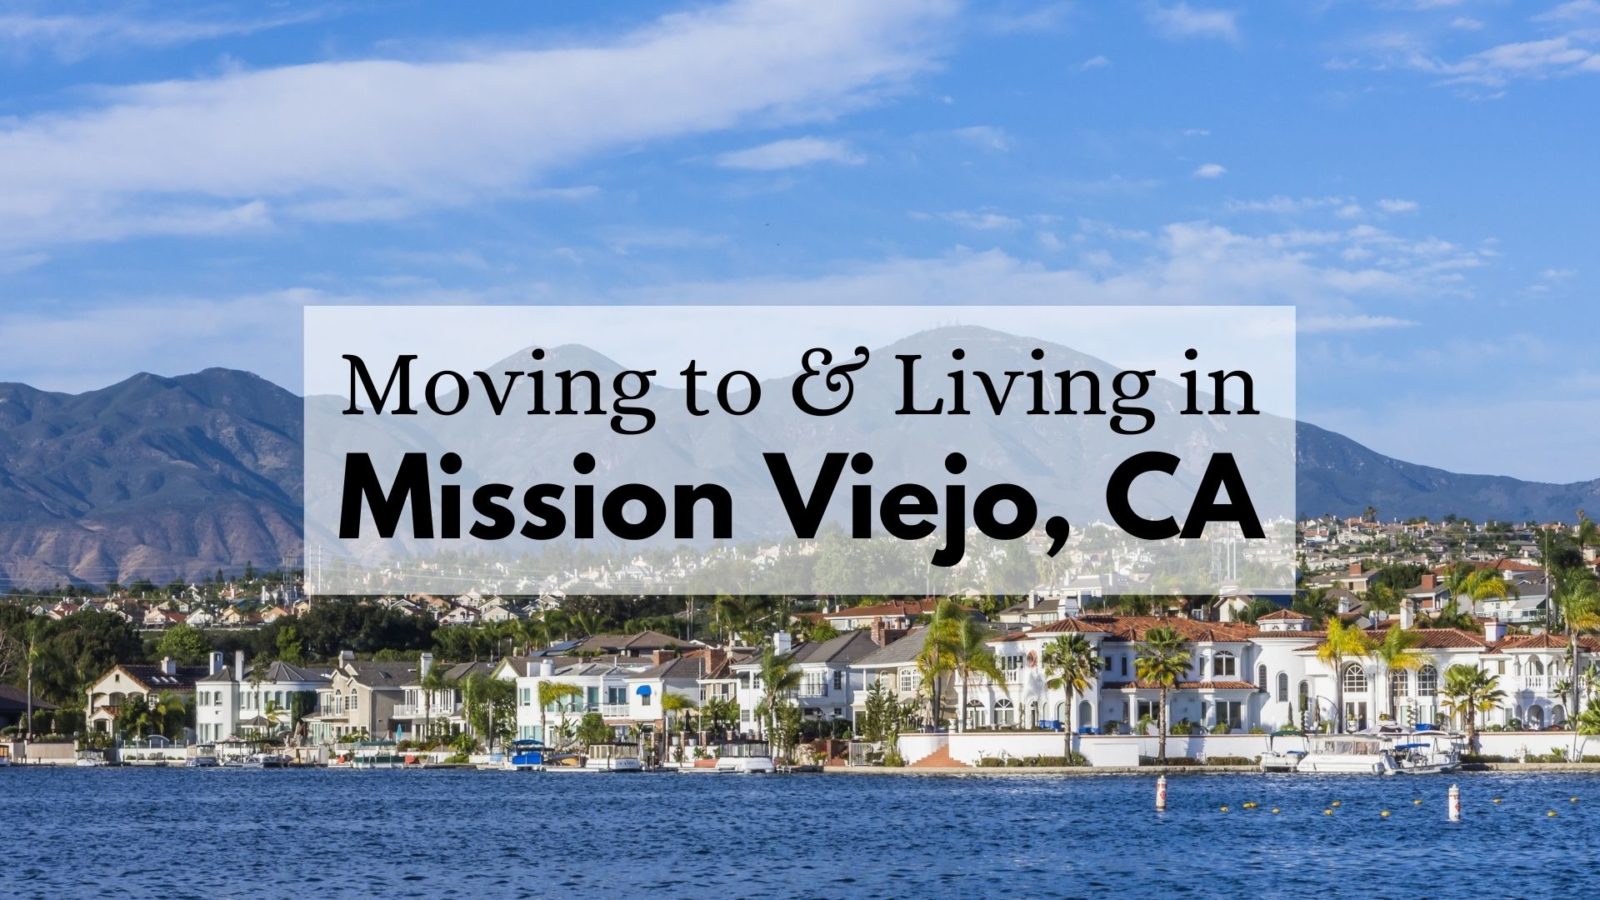 Moving to & Living in Mission Viejo, CA